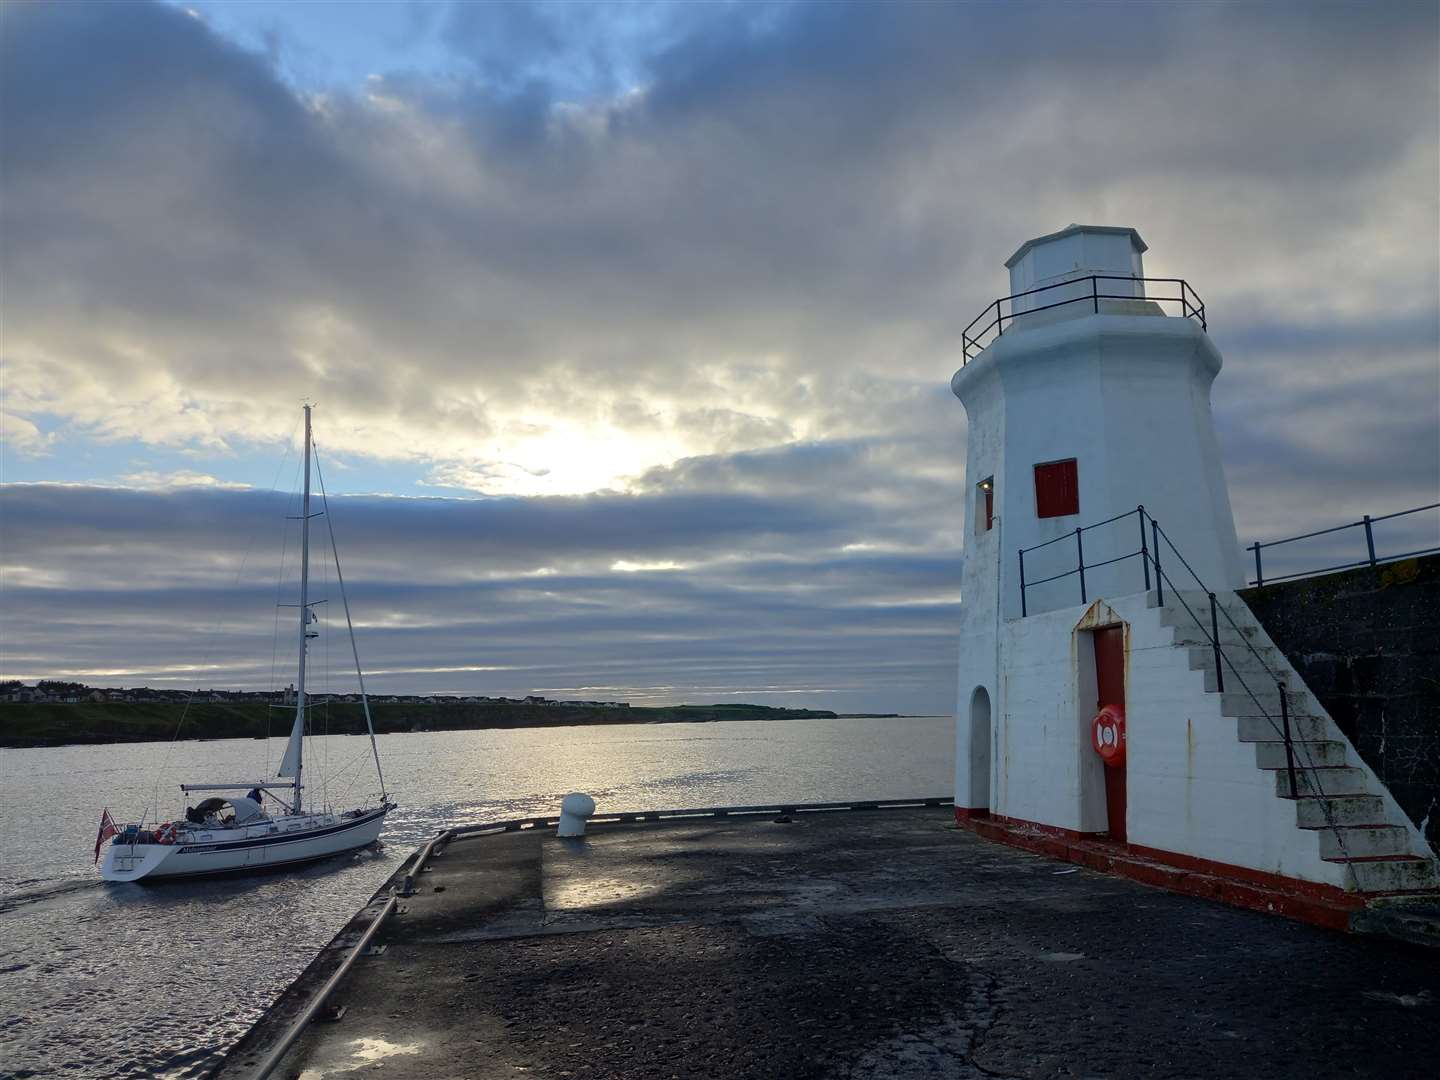 Matthew Towe made an early start and enjoyed some lovely views around the harbour in Wick.